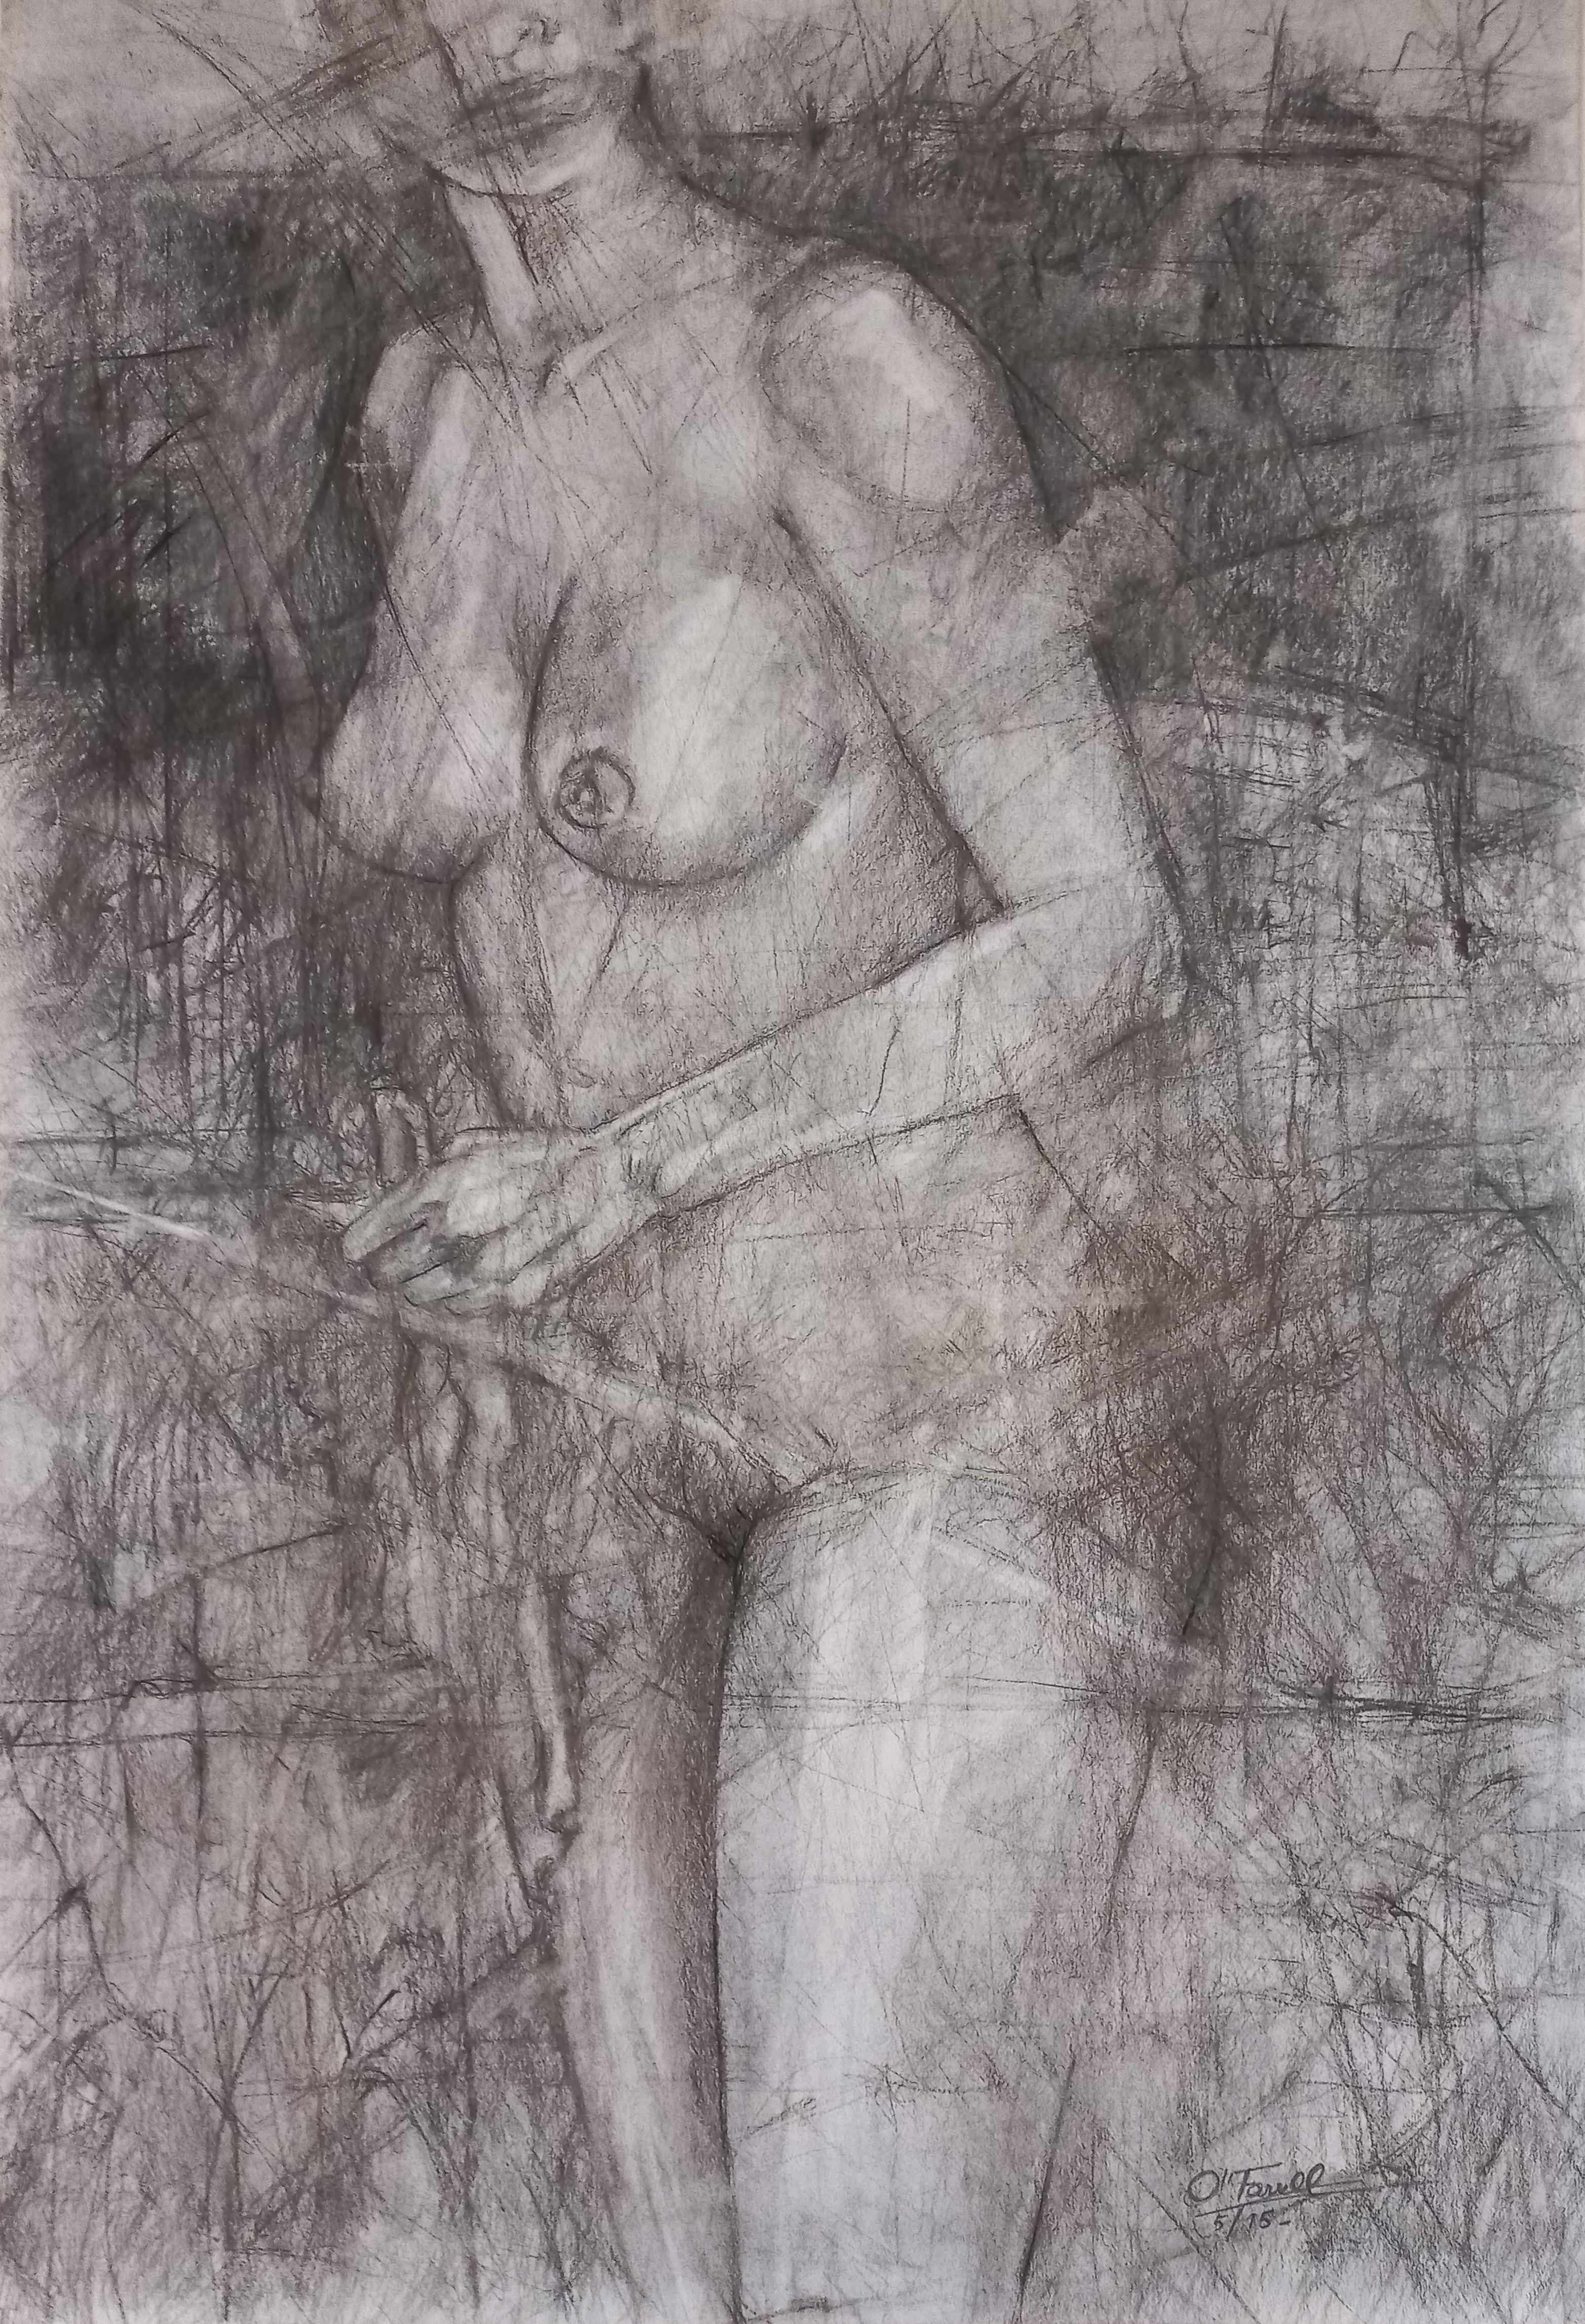 O'Farrell Nude Painting - A nude